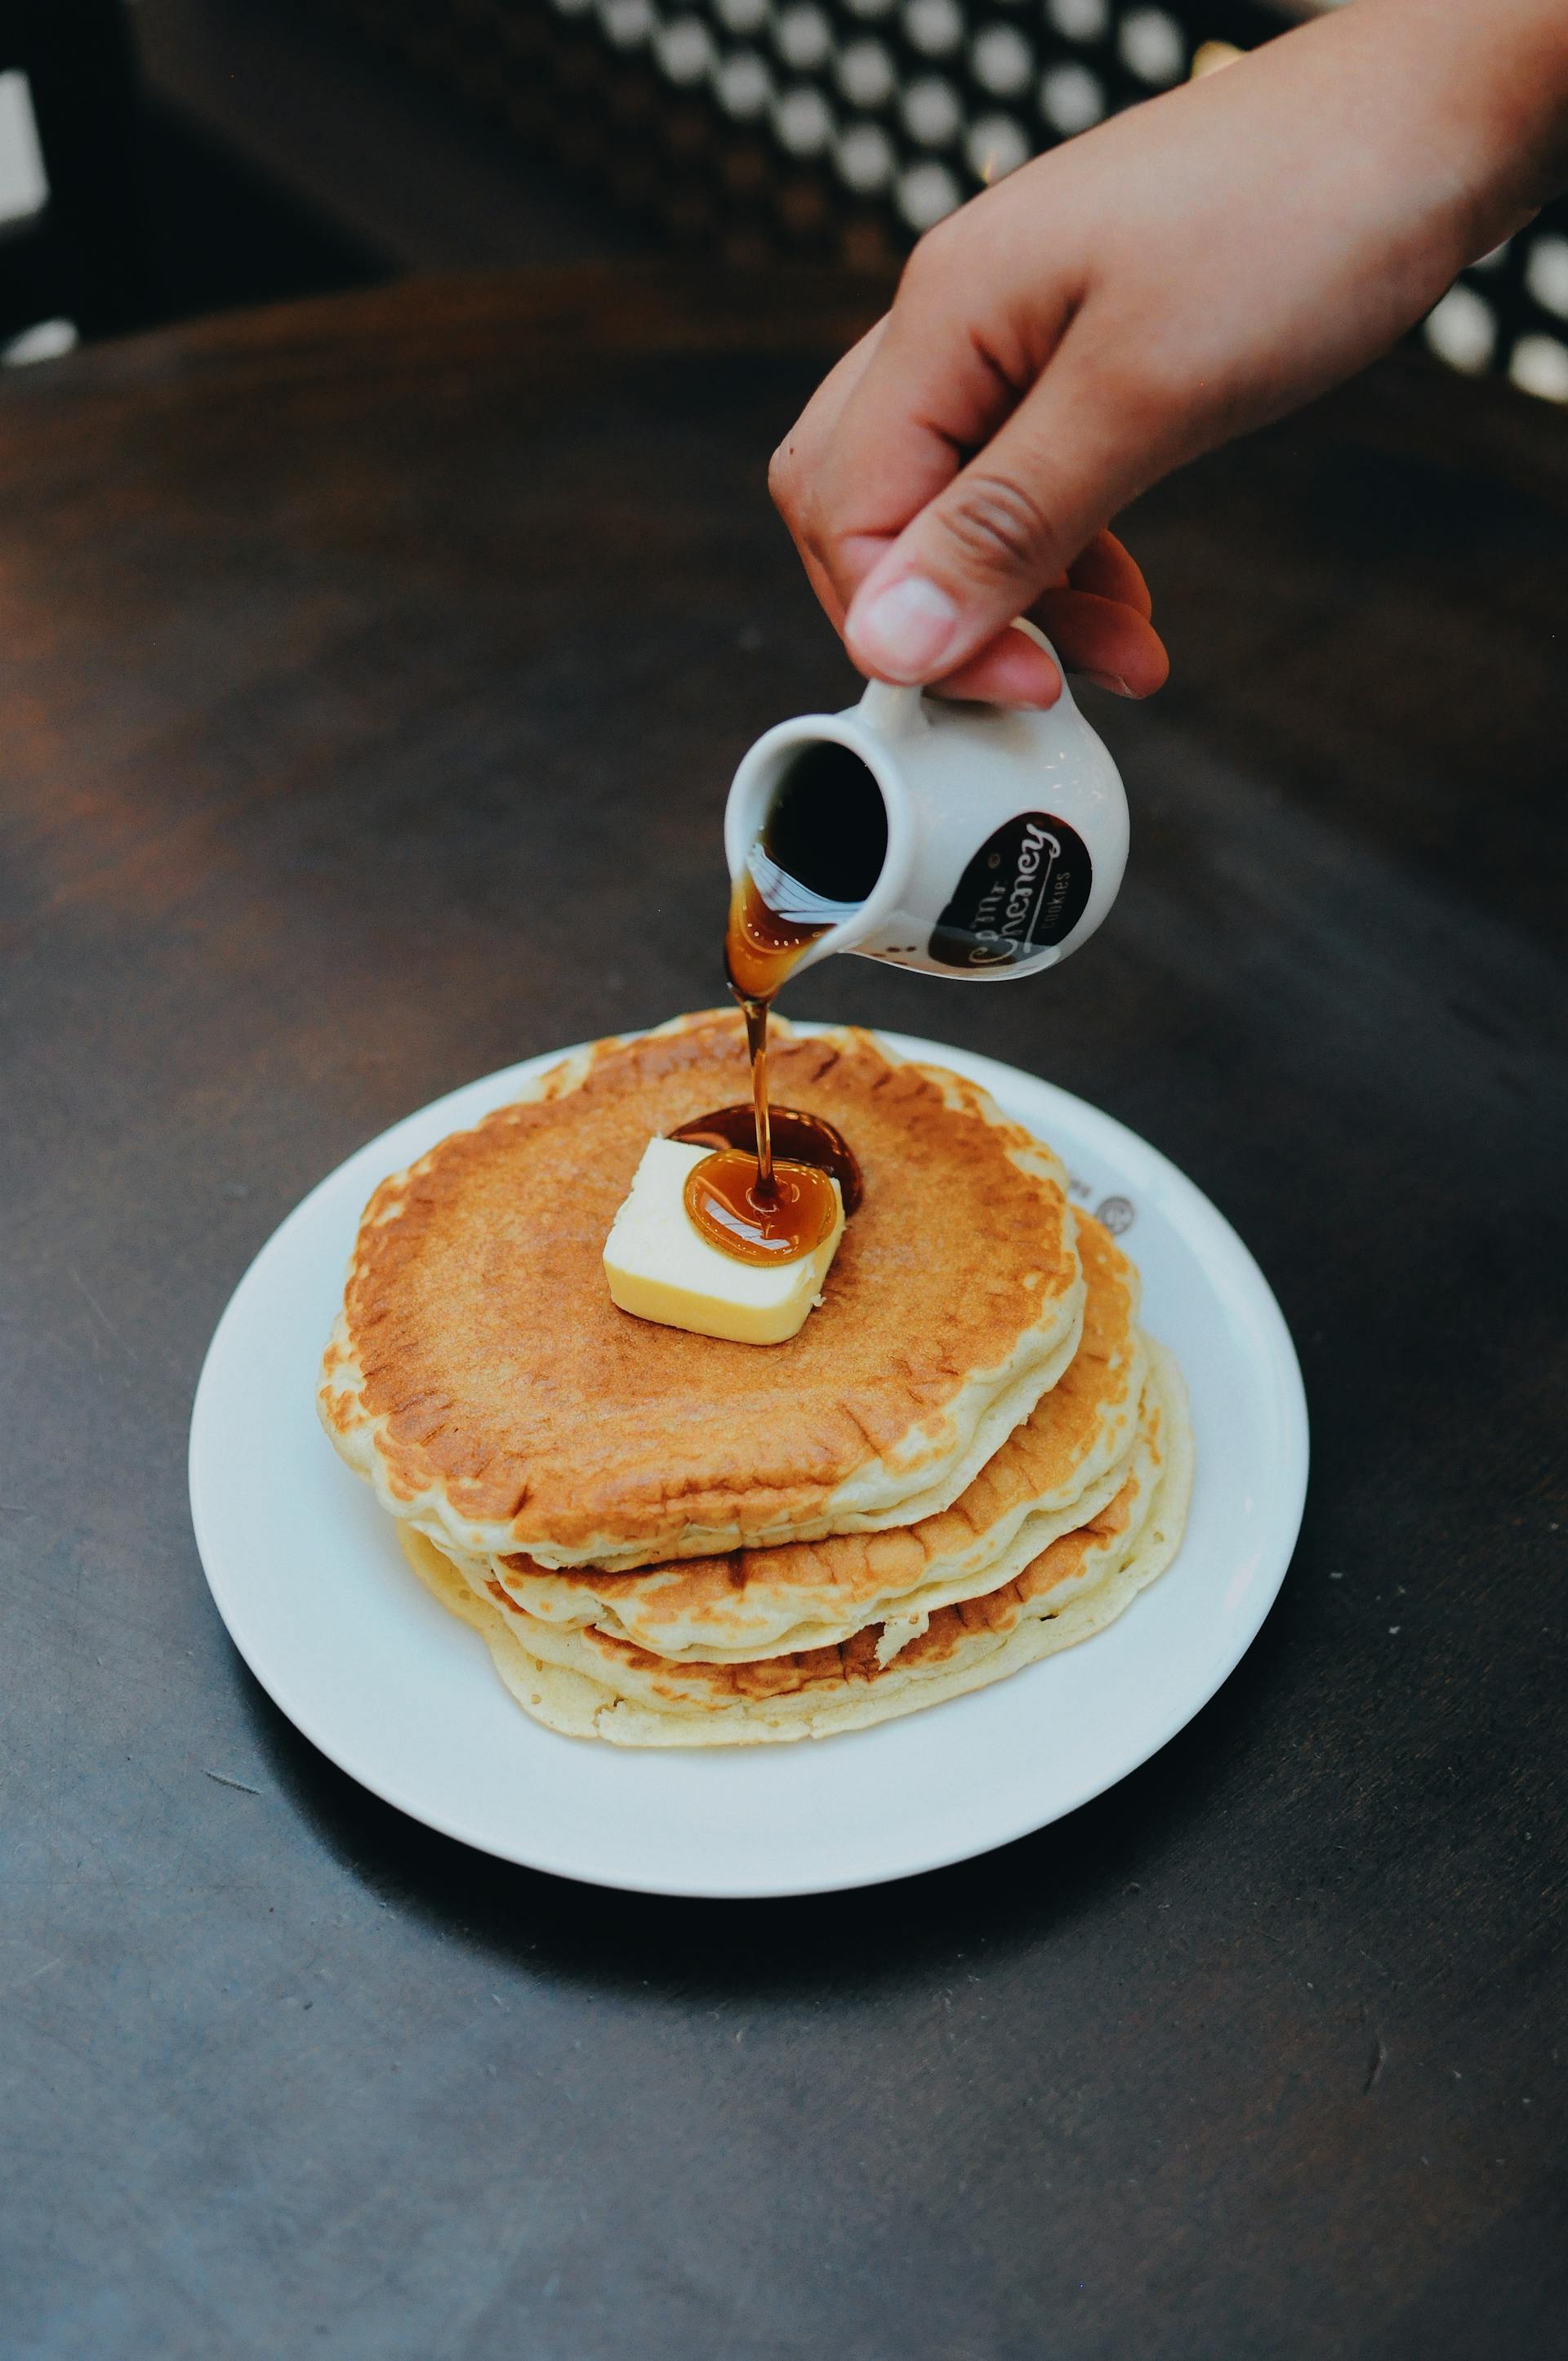 A person pouring syrup on pancakes | Source: Pexels